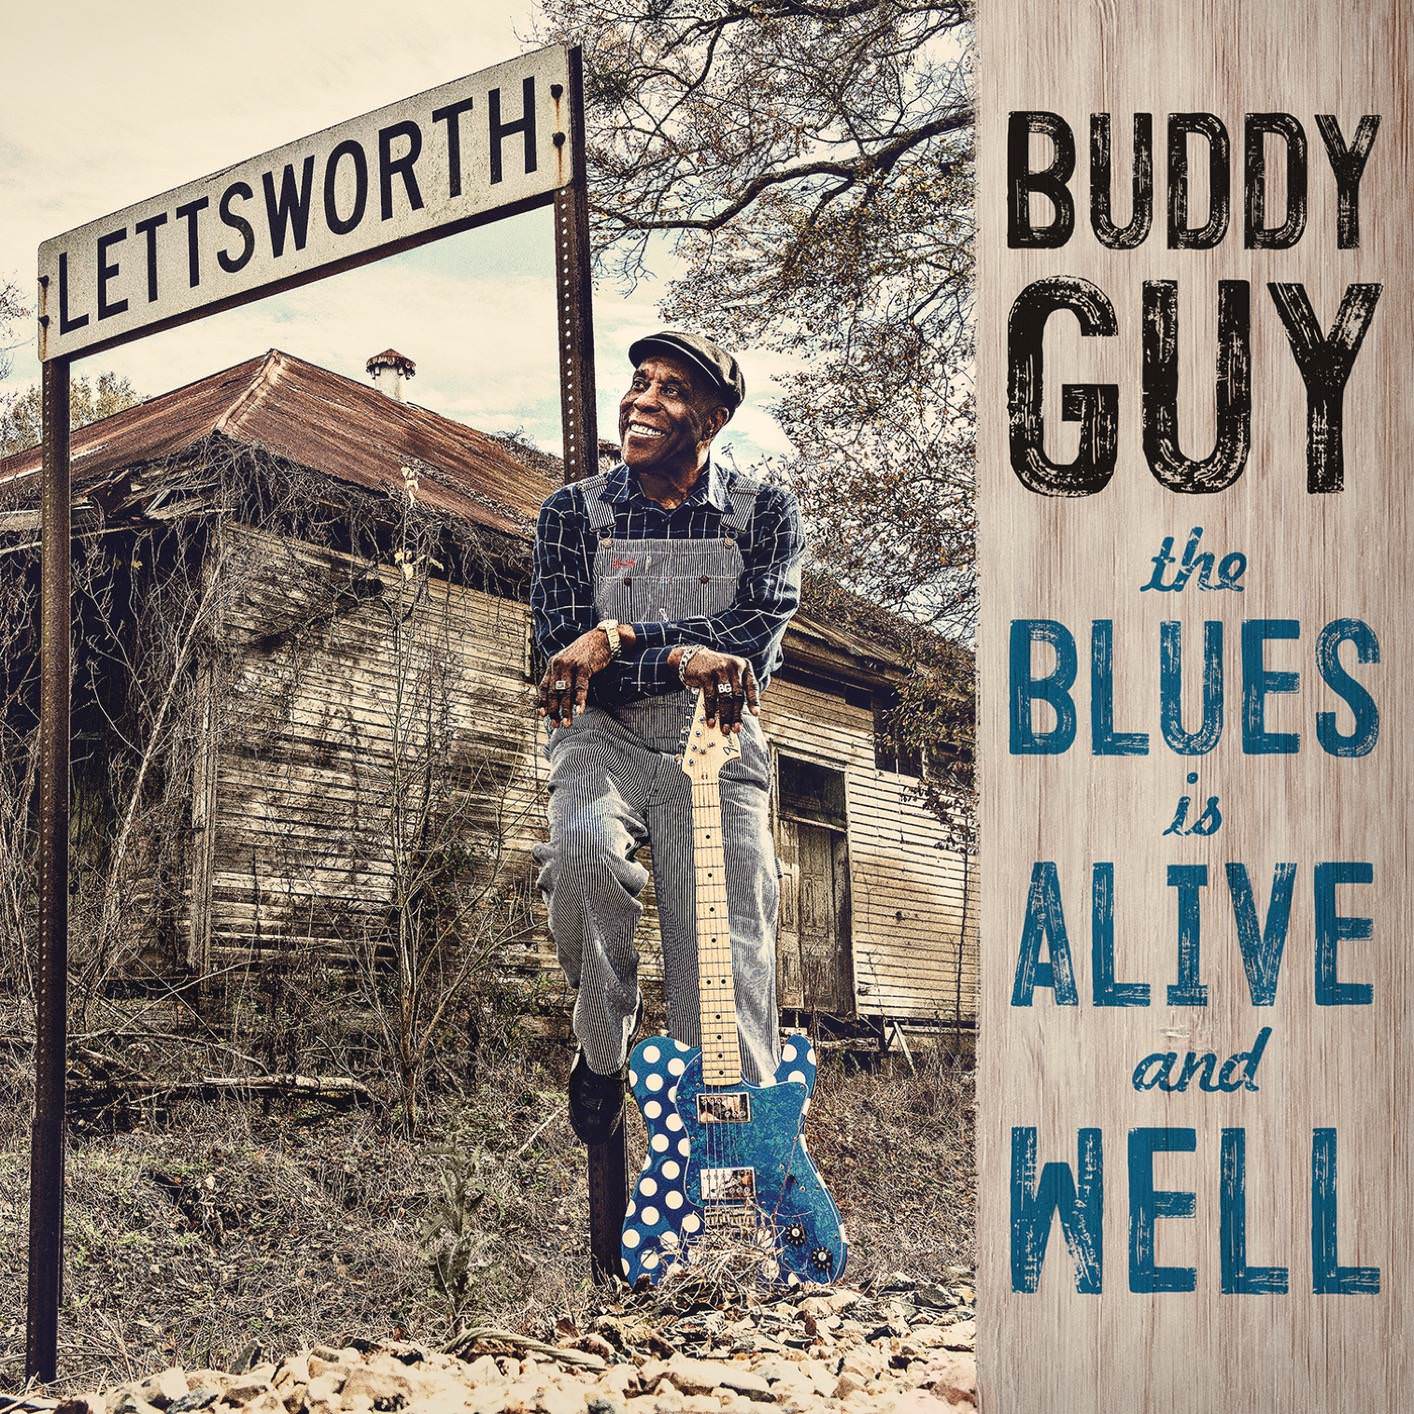 Buddy Guy – The Blues Is Alive And Well (2018) [FLAC 24bit/96kHz]